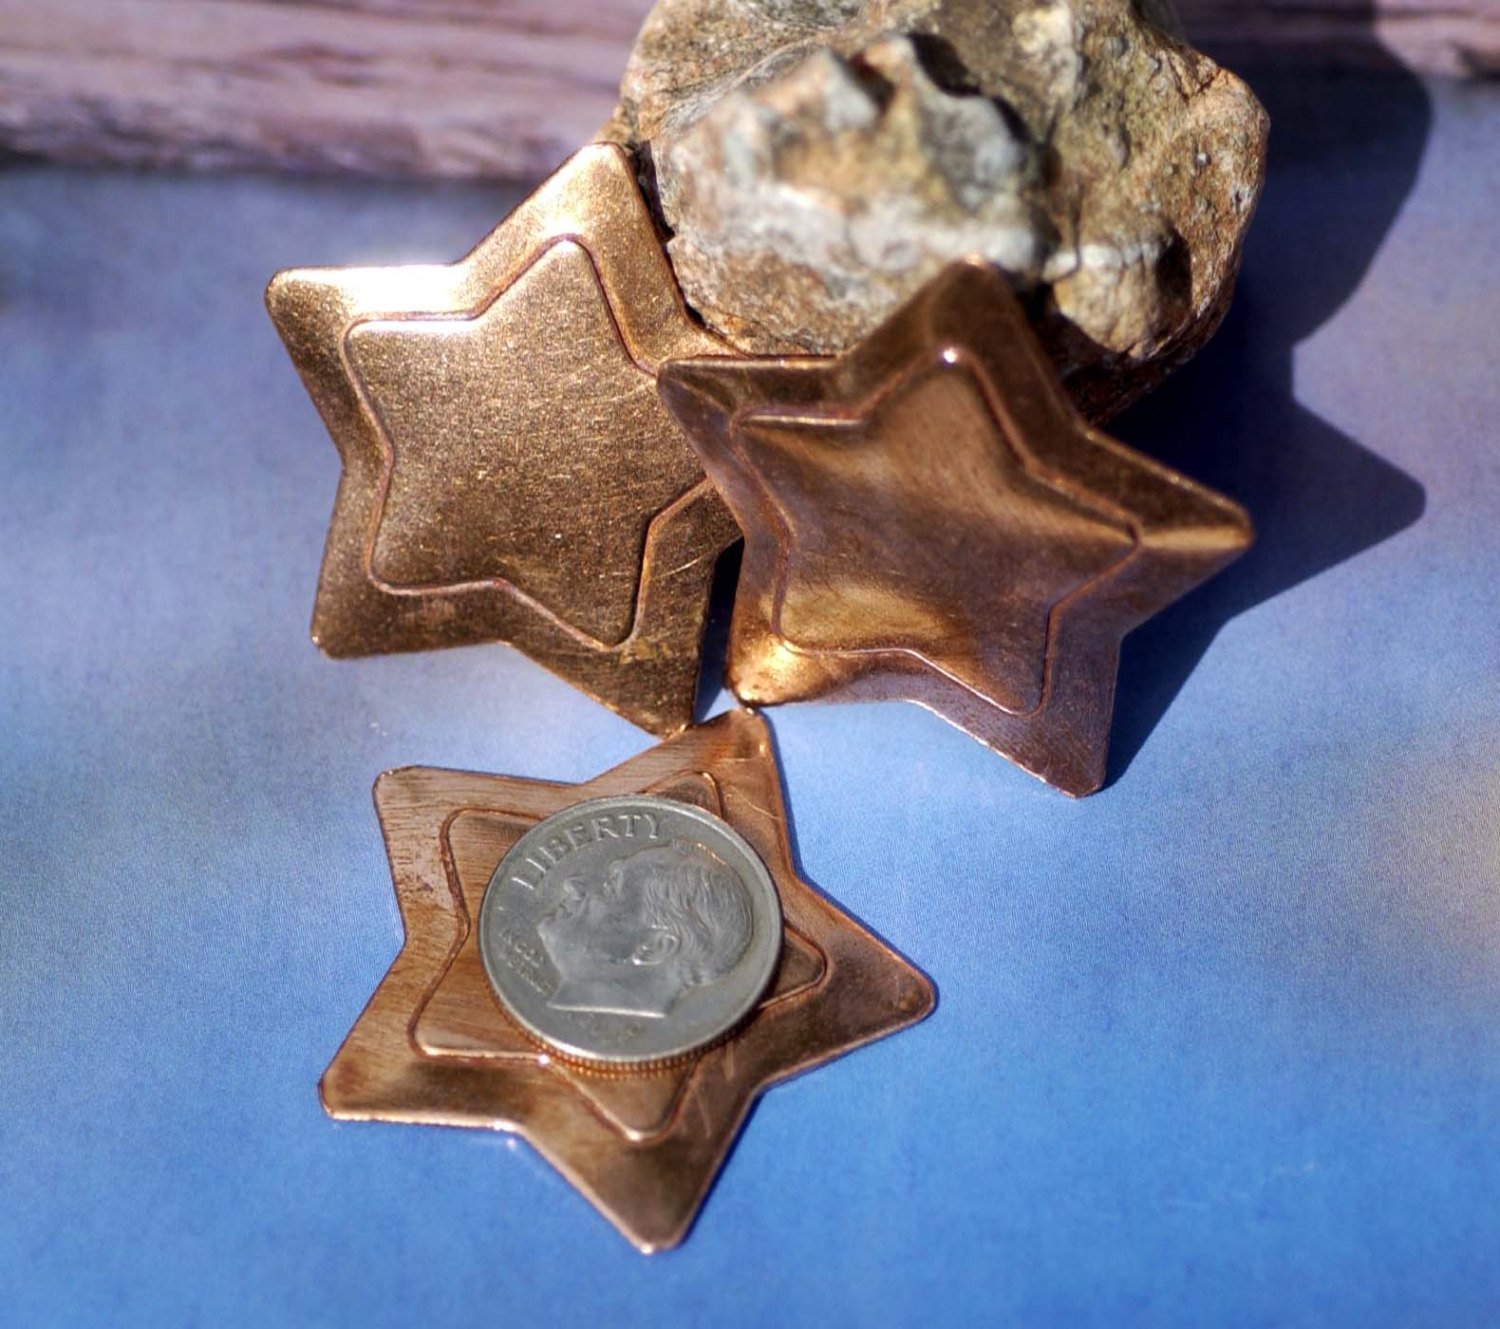 Star in Star 36mm with Embossed Star Blank Cutout for Enameling Stamping Texturing Metalworking Jewelry Making Blanks - 4 pieces